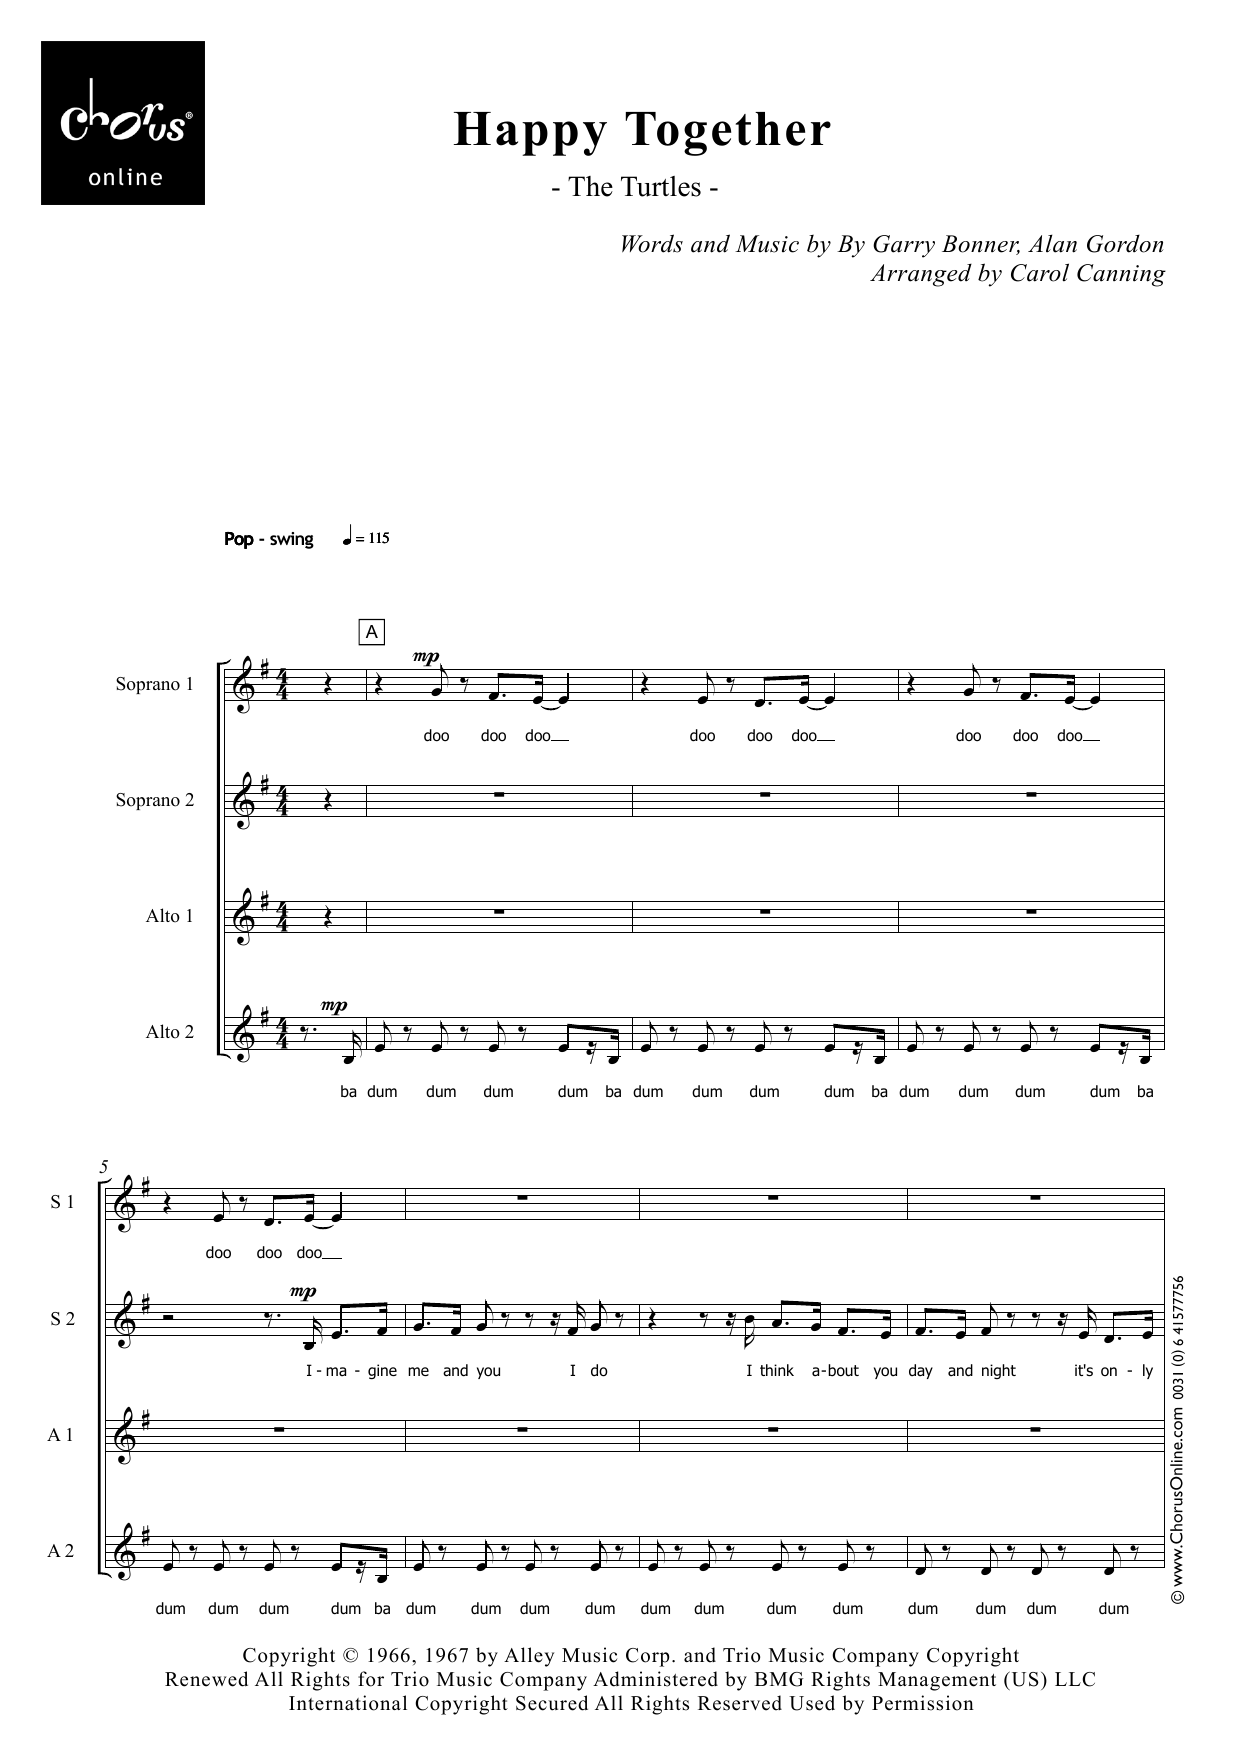 The Turtles Happy Together (arr. Carol Canning) sheet music notes printable PDF score